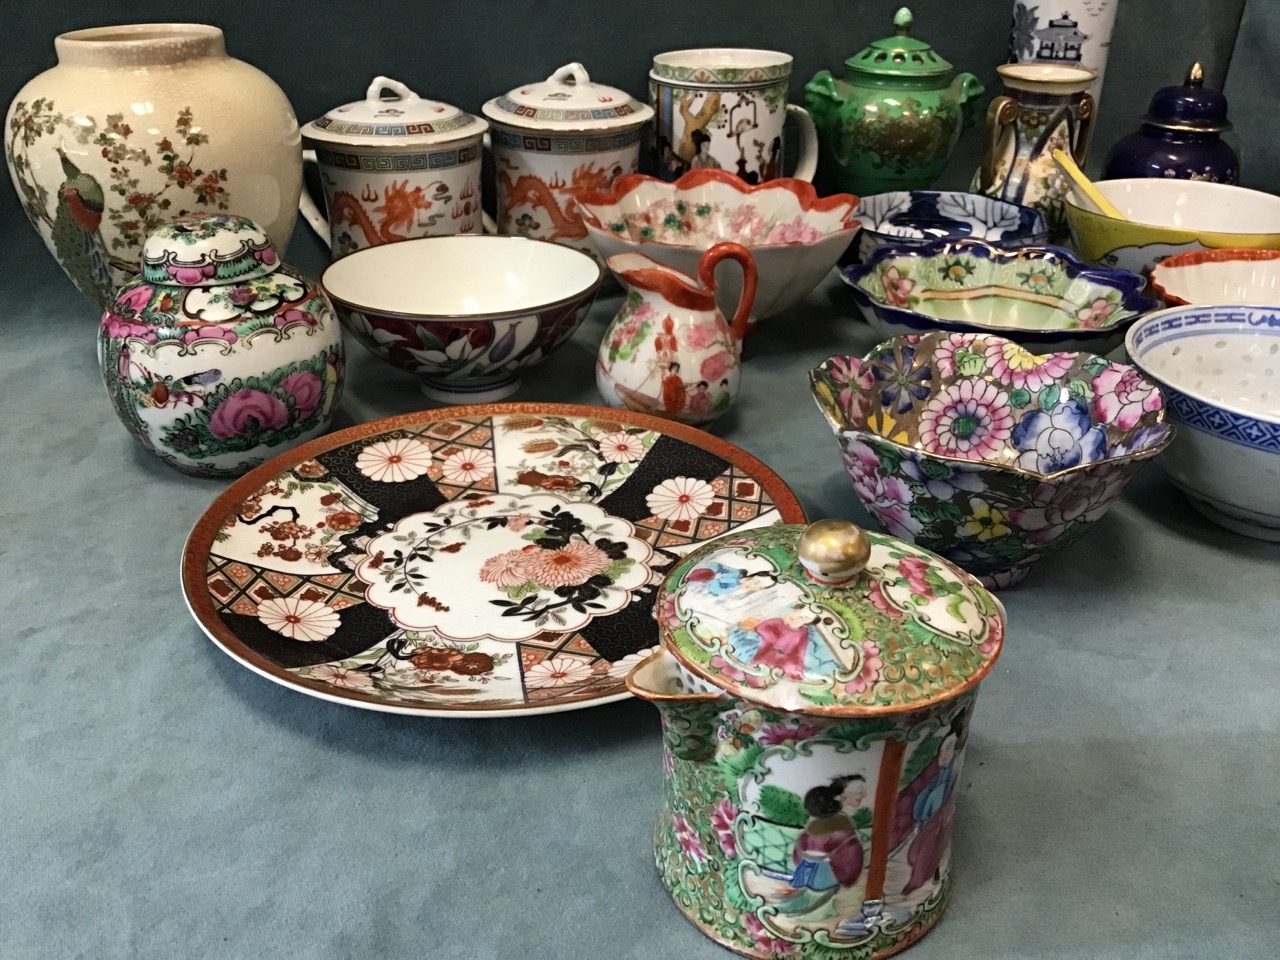 Miscellaneous oriental ceramics - a C19th Canton mandarin pattern covered jug, mugs, vases, a - Image 2 of 3